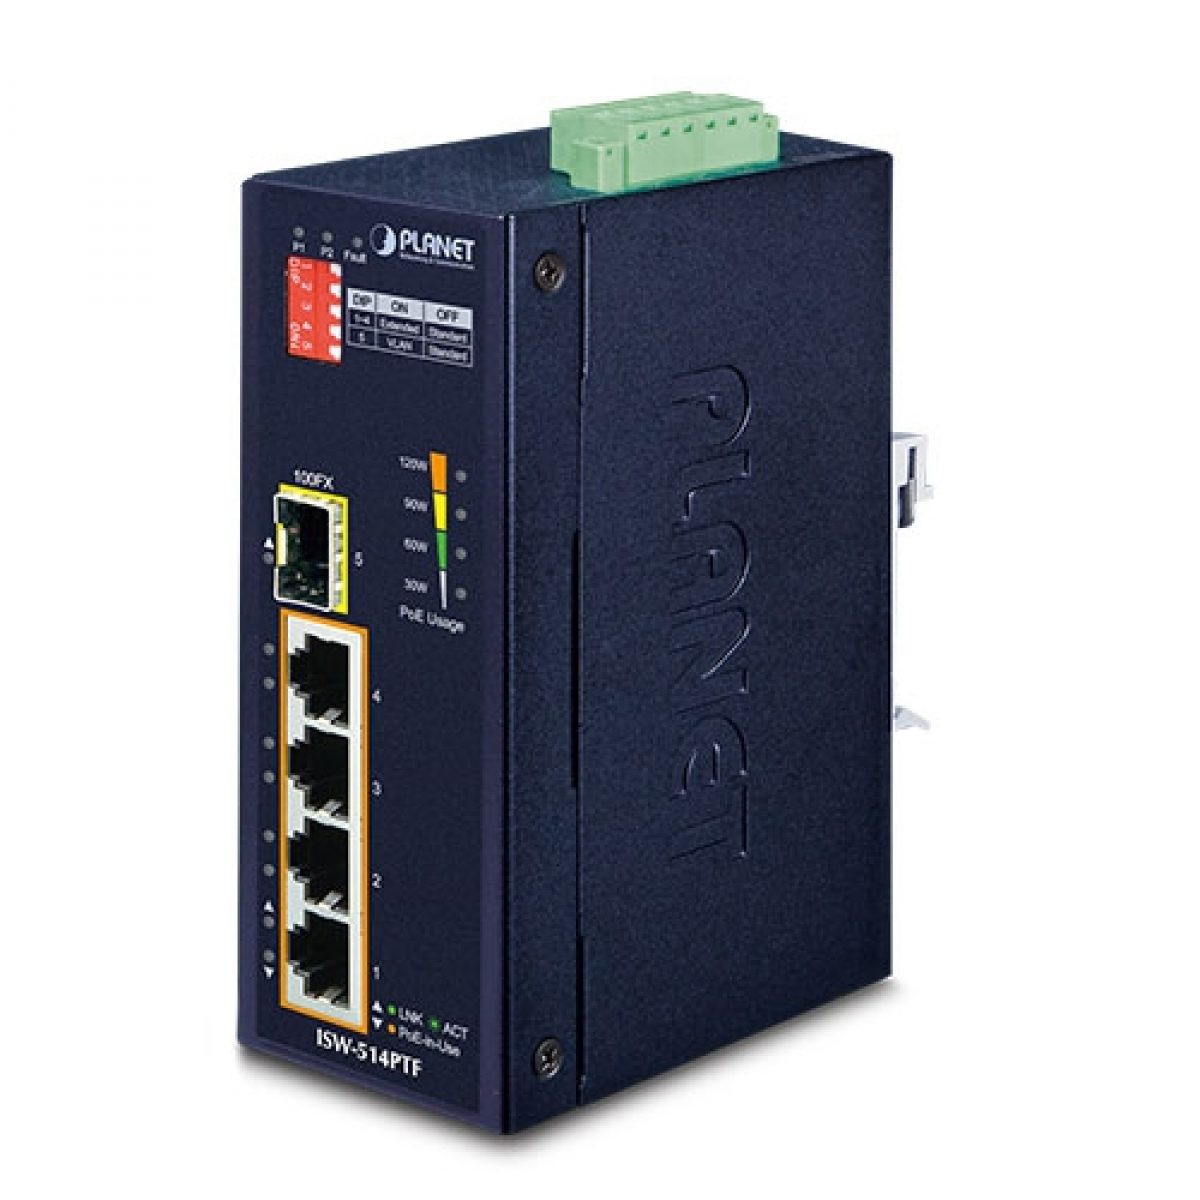  Mini Industrial 3 Port Gigabit PoE Switch with DC12V-48V to  DC48V Voltage Booster Hardened RJ45 10/100/1000Mbps 802.3at 30W/Port  Ethernet Switch Din Rail Mount Compatible with IP Camera VOIP Phone :  Electronics